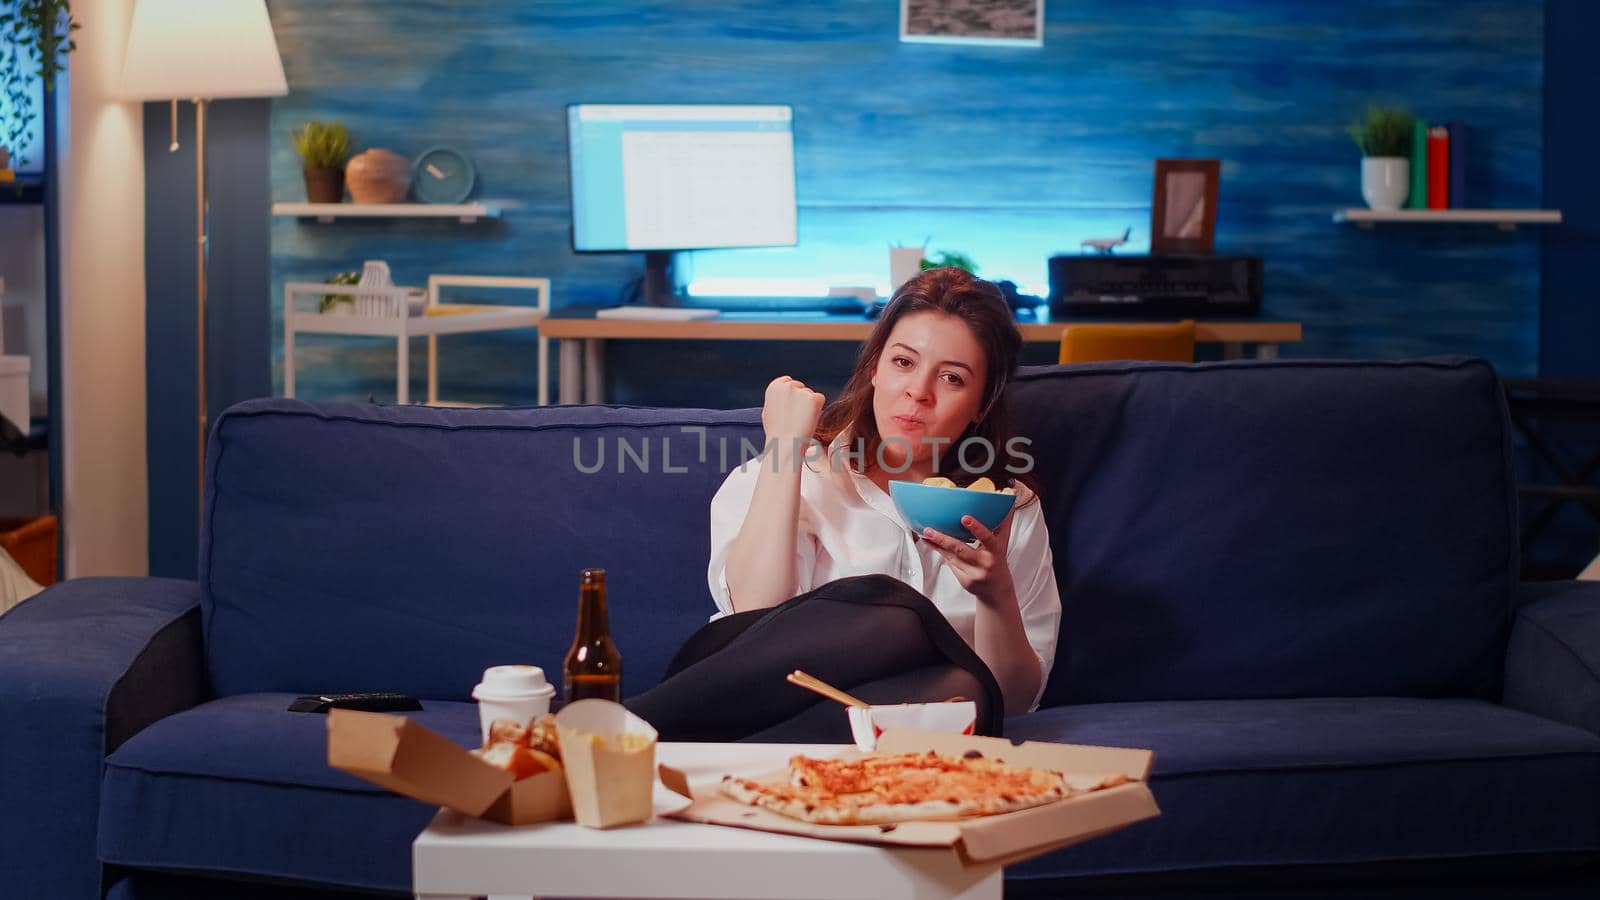 POV of adult sitting on couch laughing while looking at TV and eating chips from bowl. Caucasian woman having fun watching television after work with takeaway food on table in living room